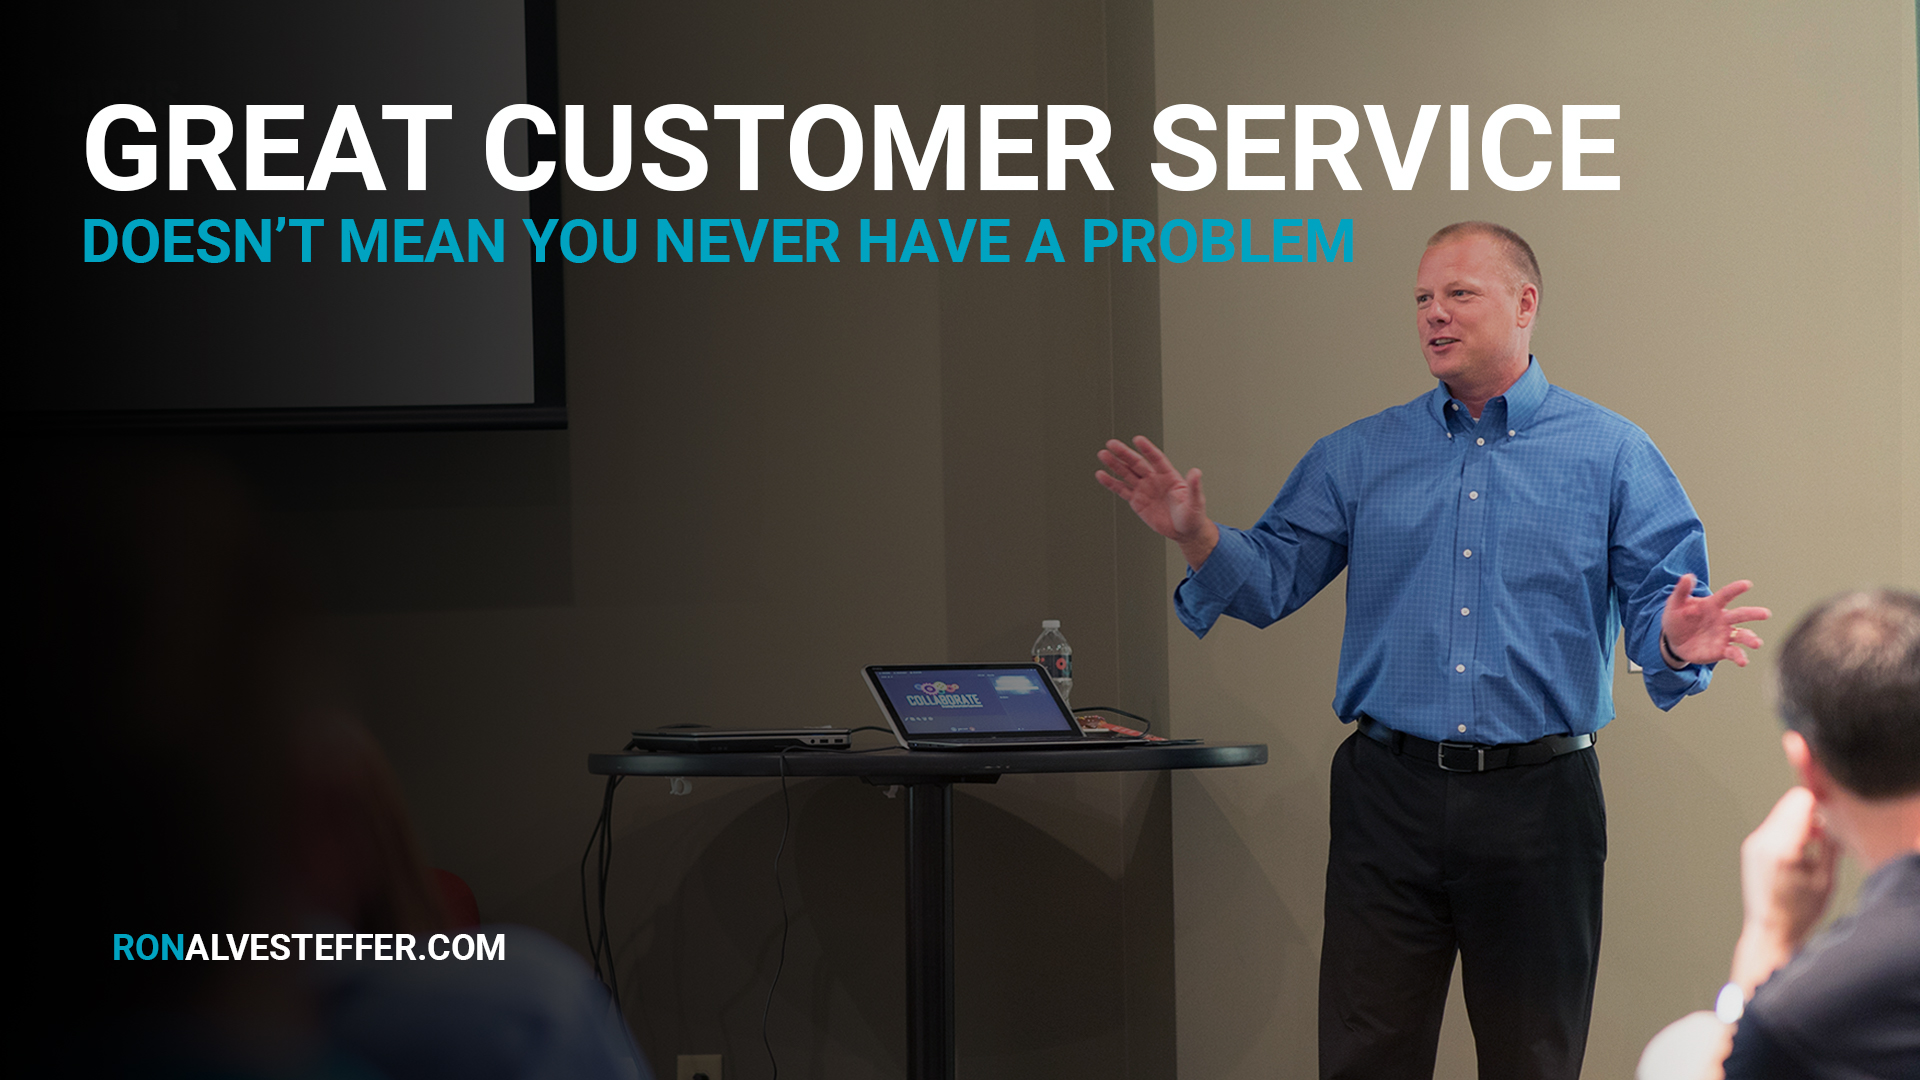 Great Customer Service Doesn’t Mean You Never Have a Problem